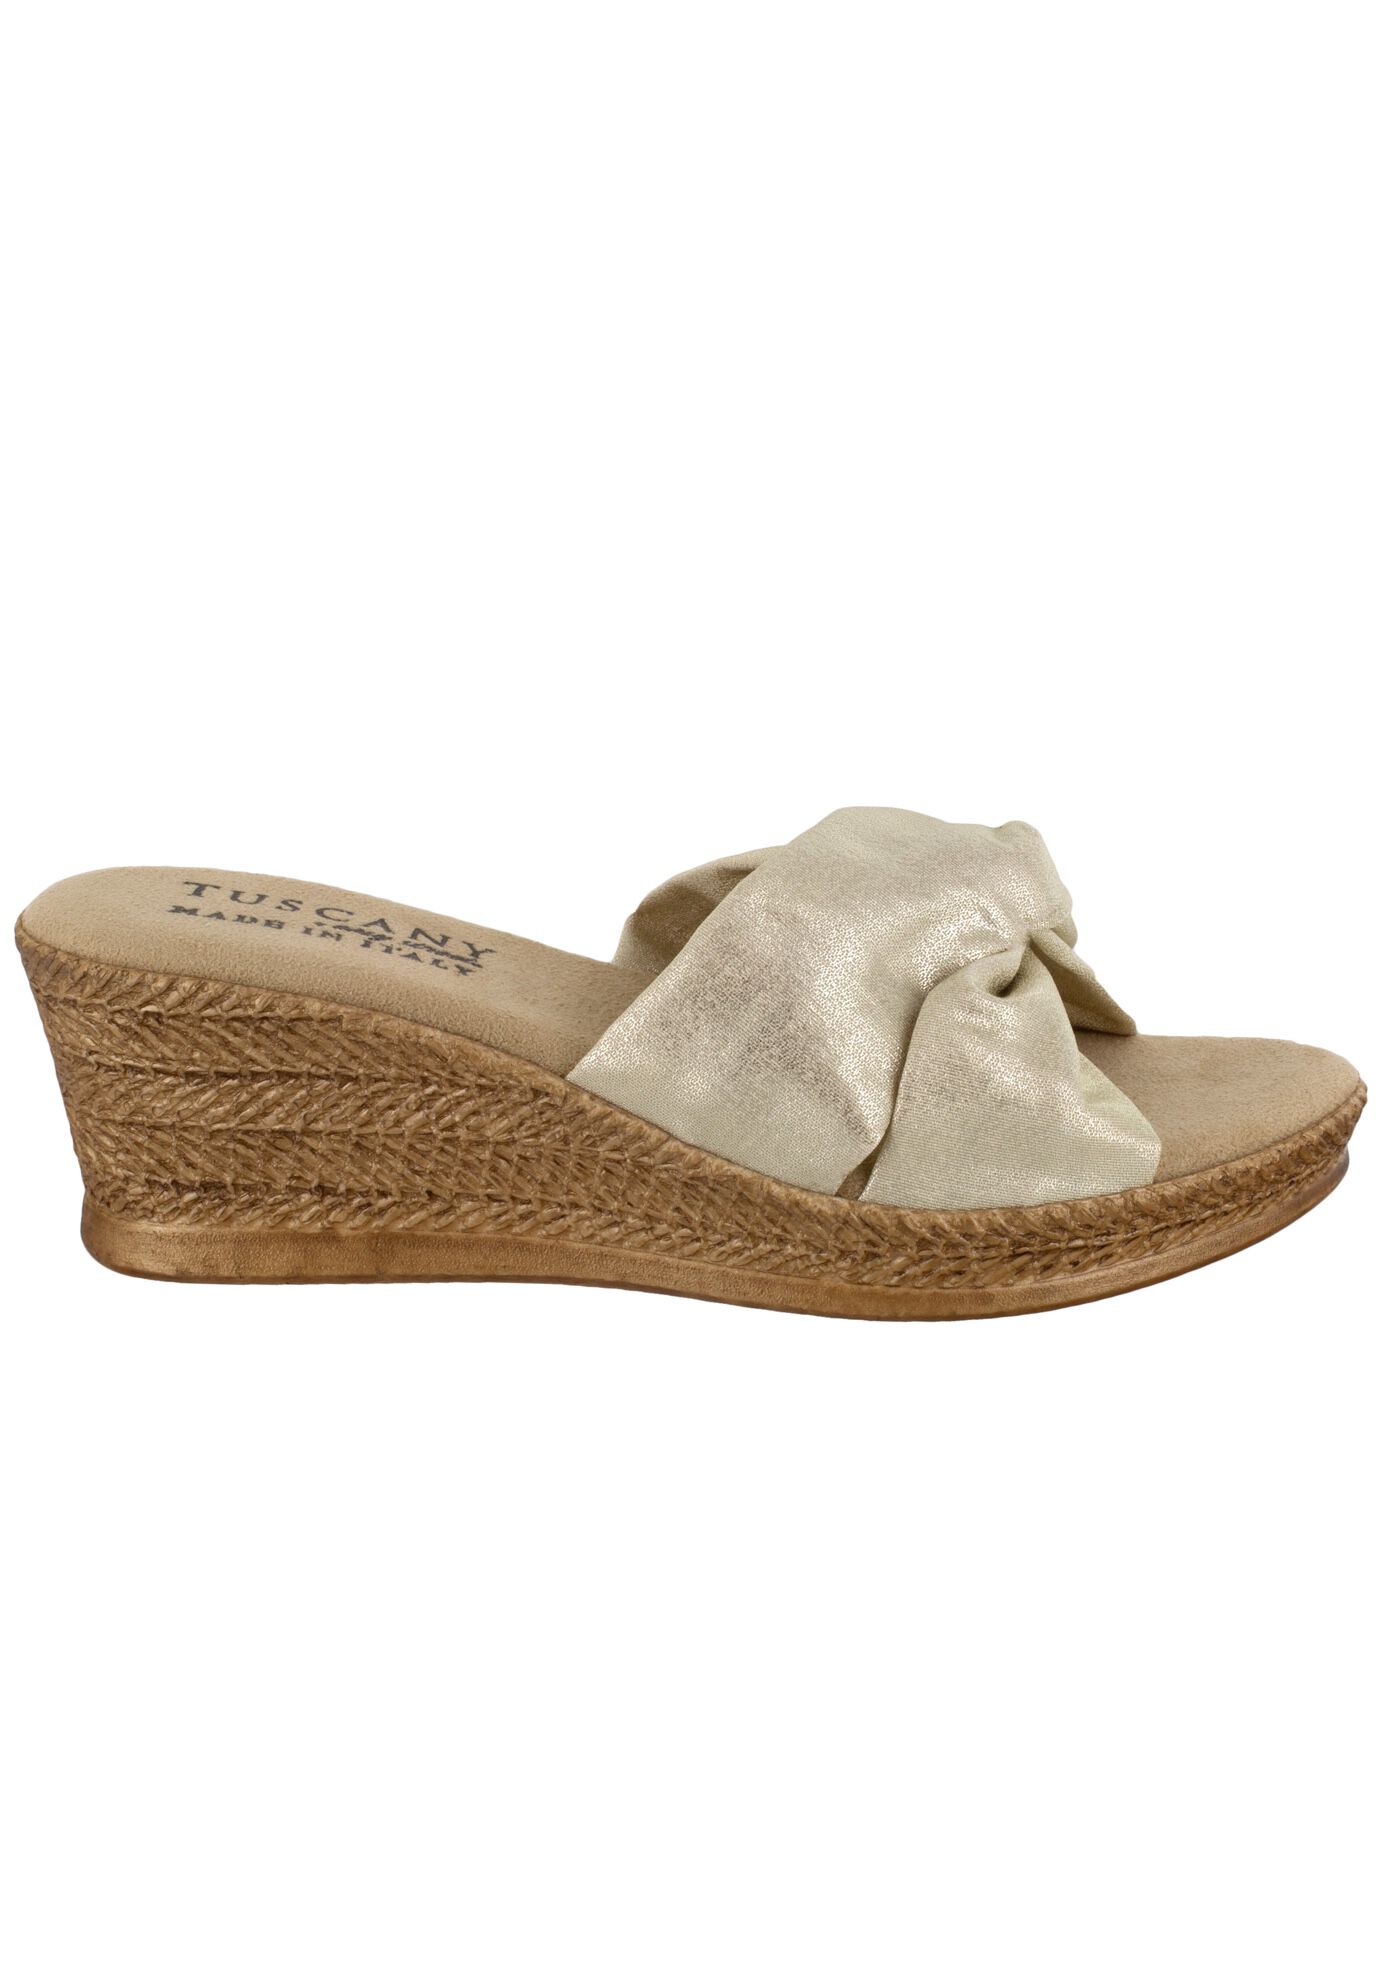 tuscany by easy street dinah wedge sandals